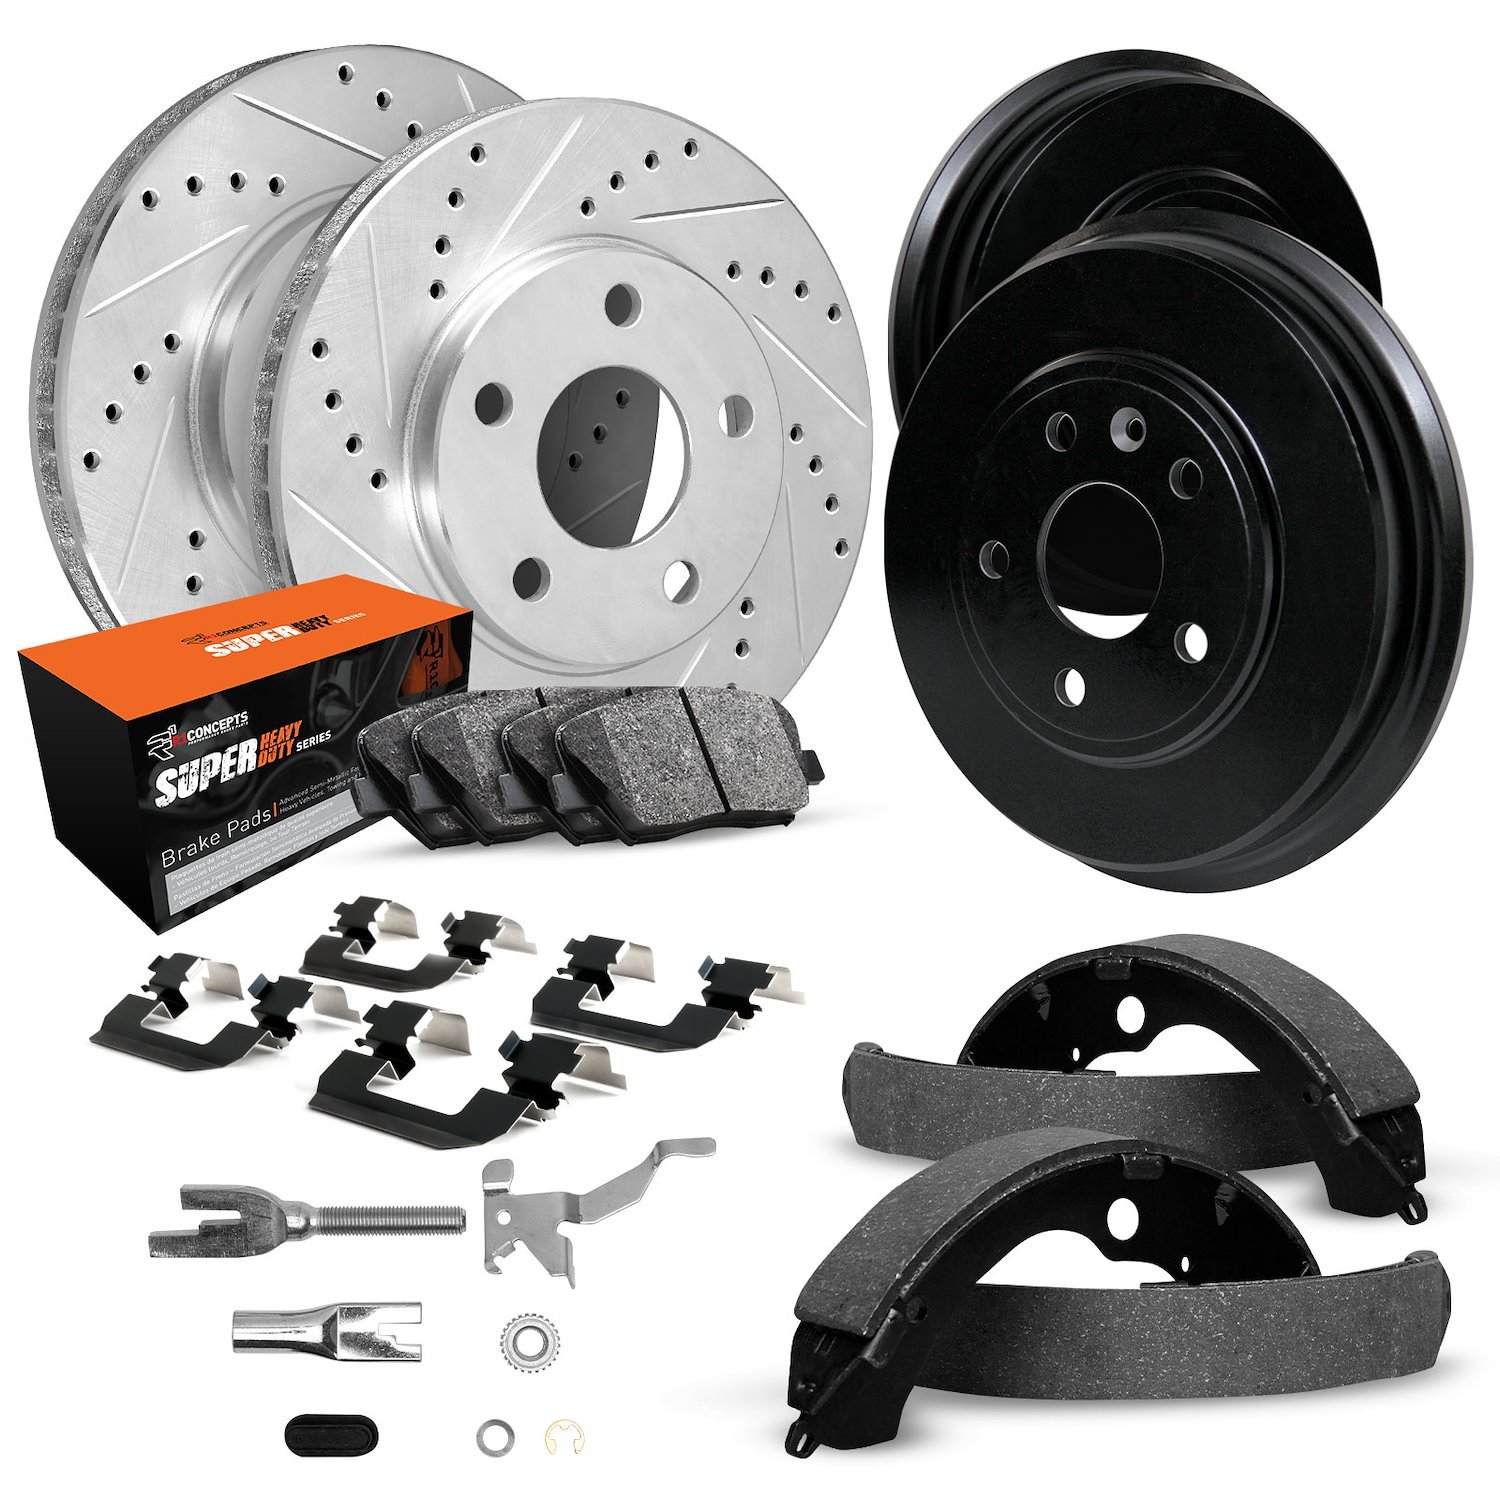 E-Line Drilled/Slotted Silver Rotor & Drum Set w/Super-Duty Pads, Shoes/Hardware/Adjusters, 2008-2013 GM